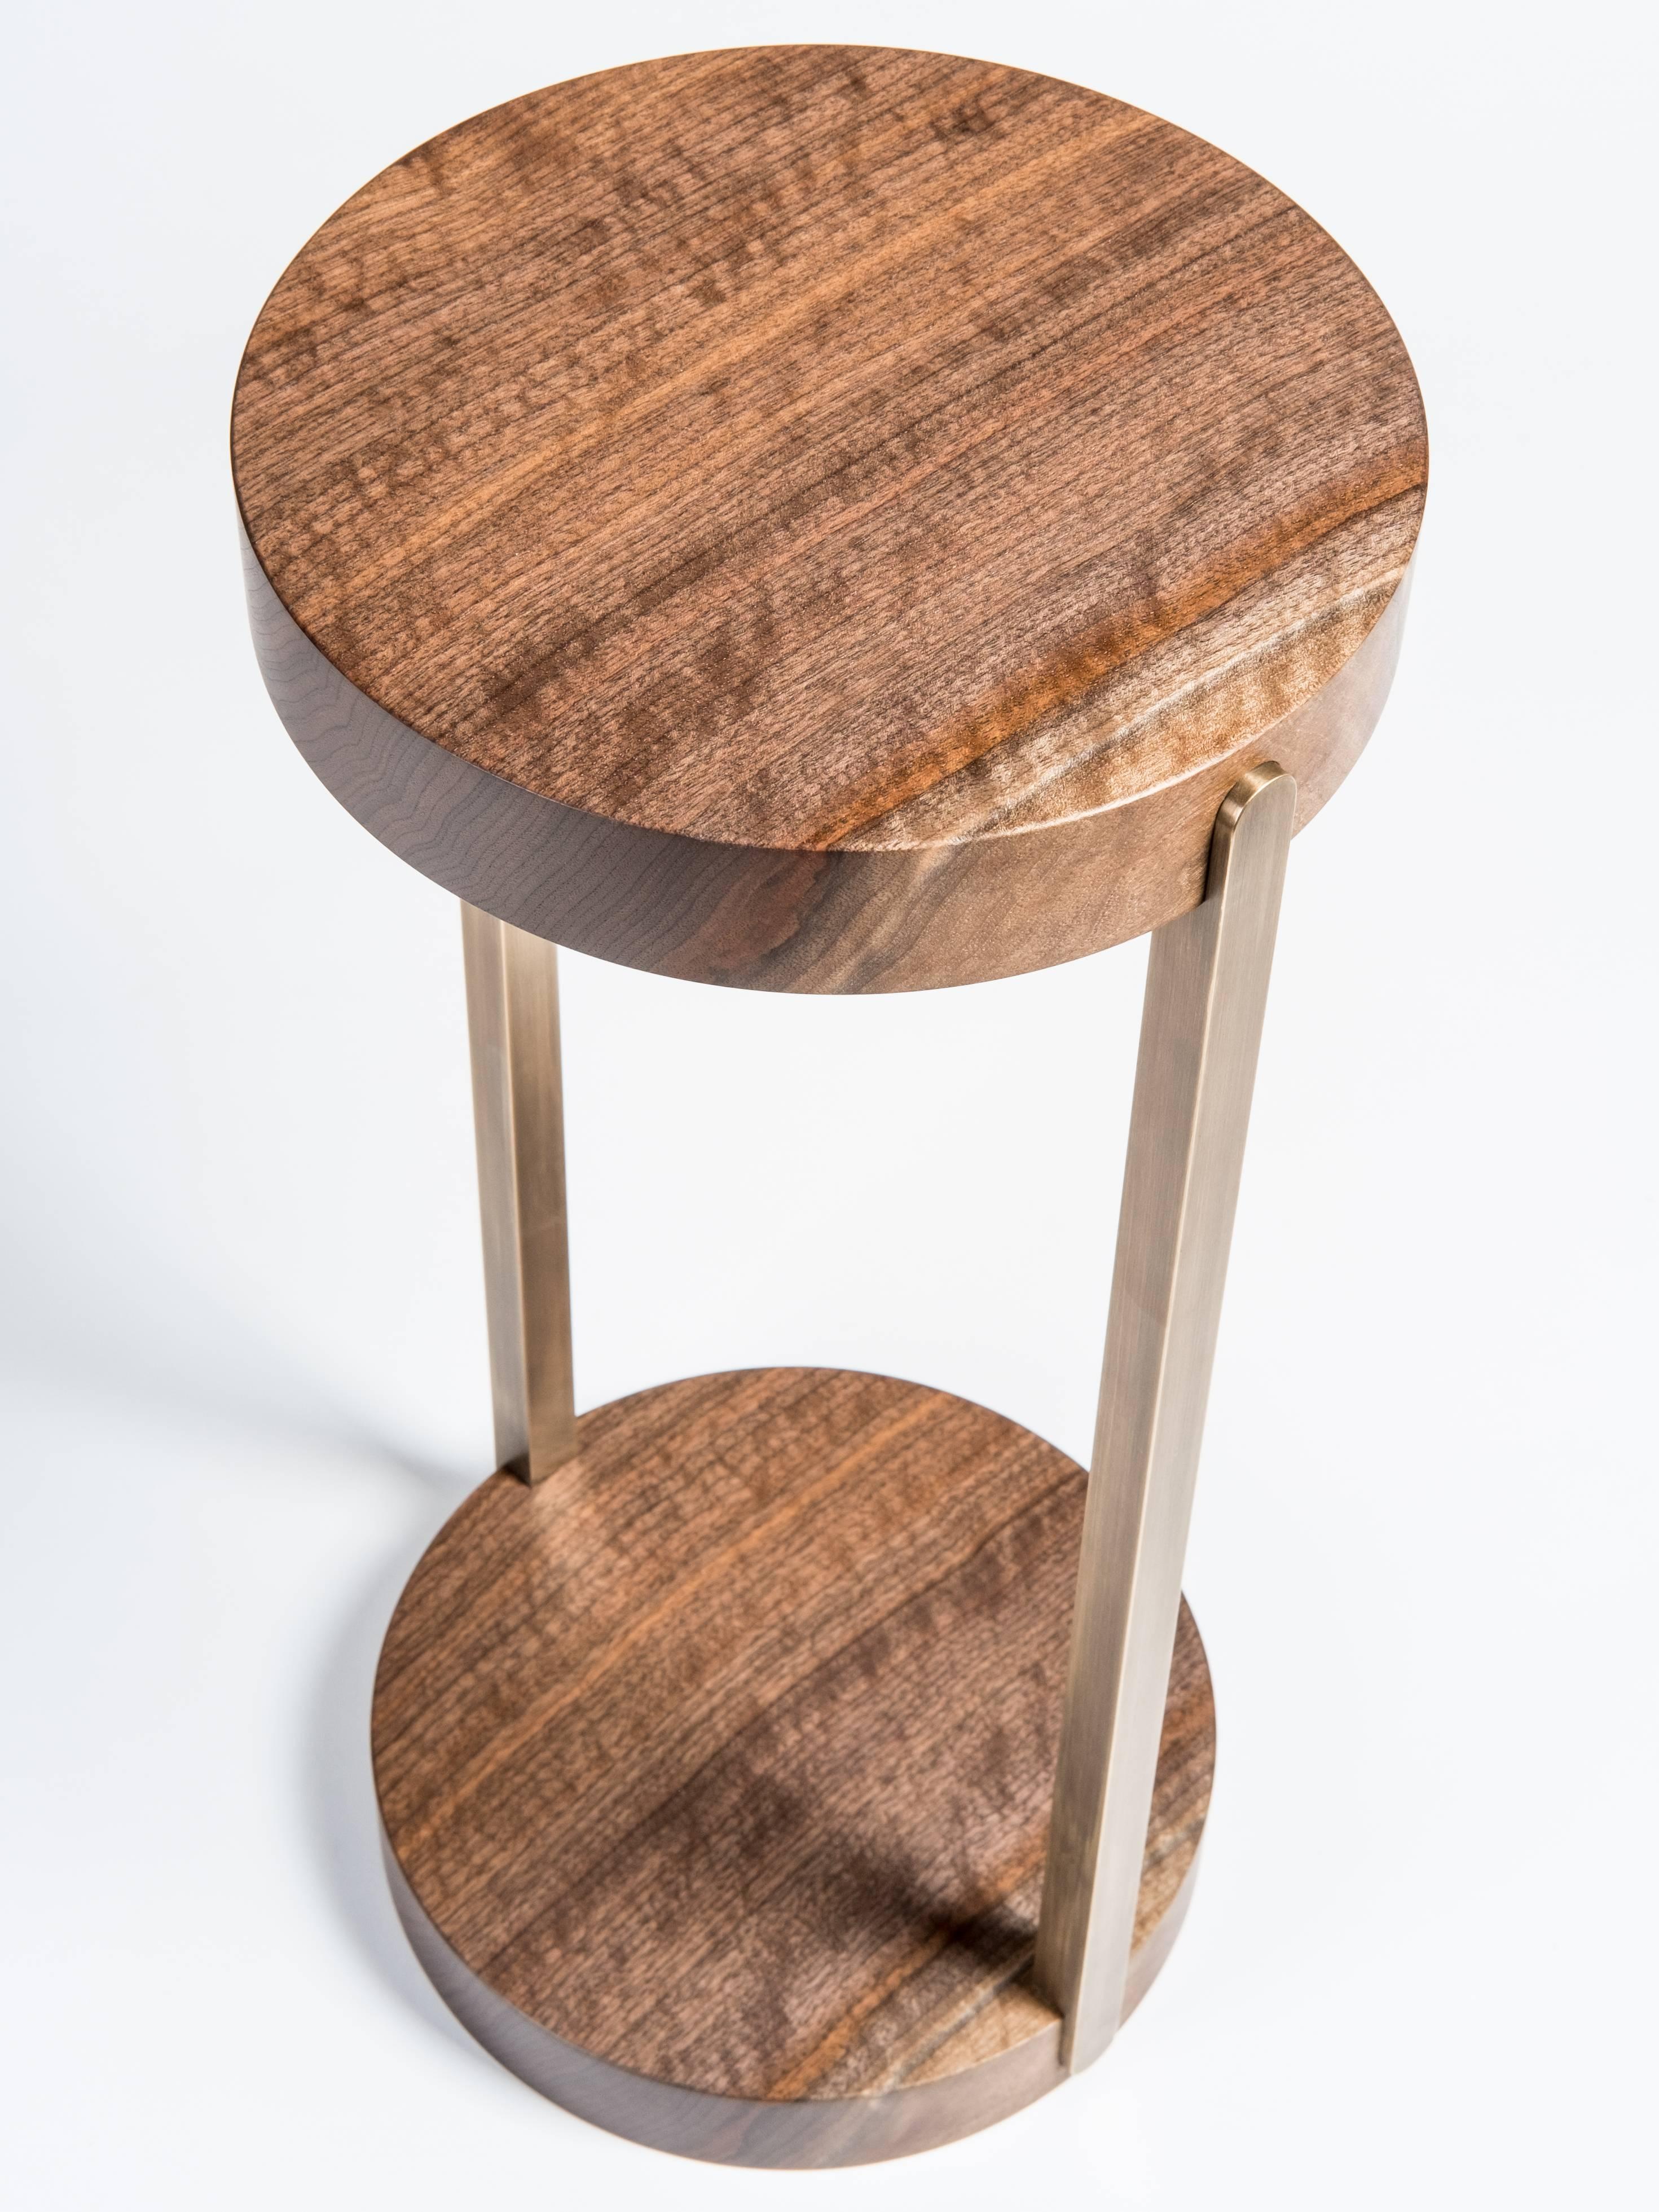 A new addition to the Union collection is the Union Mini. This is a small side or end table that can be used to hold a lamp, cocktail, or plant on top and a small stack of books or magazines on the bottom. Offered in oiled Claro walnut with solid